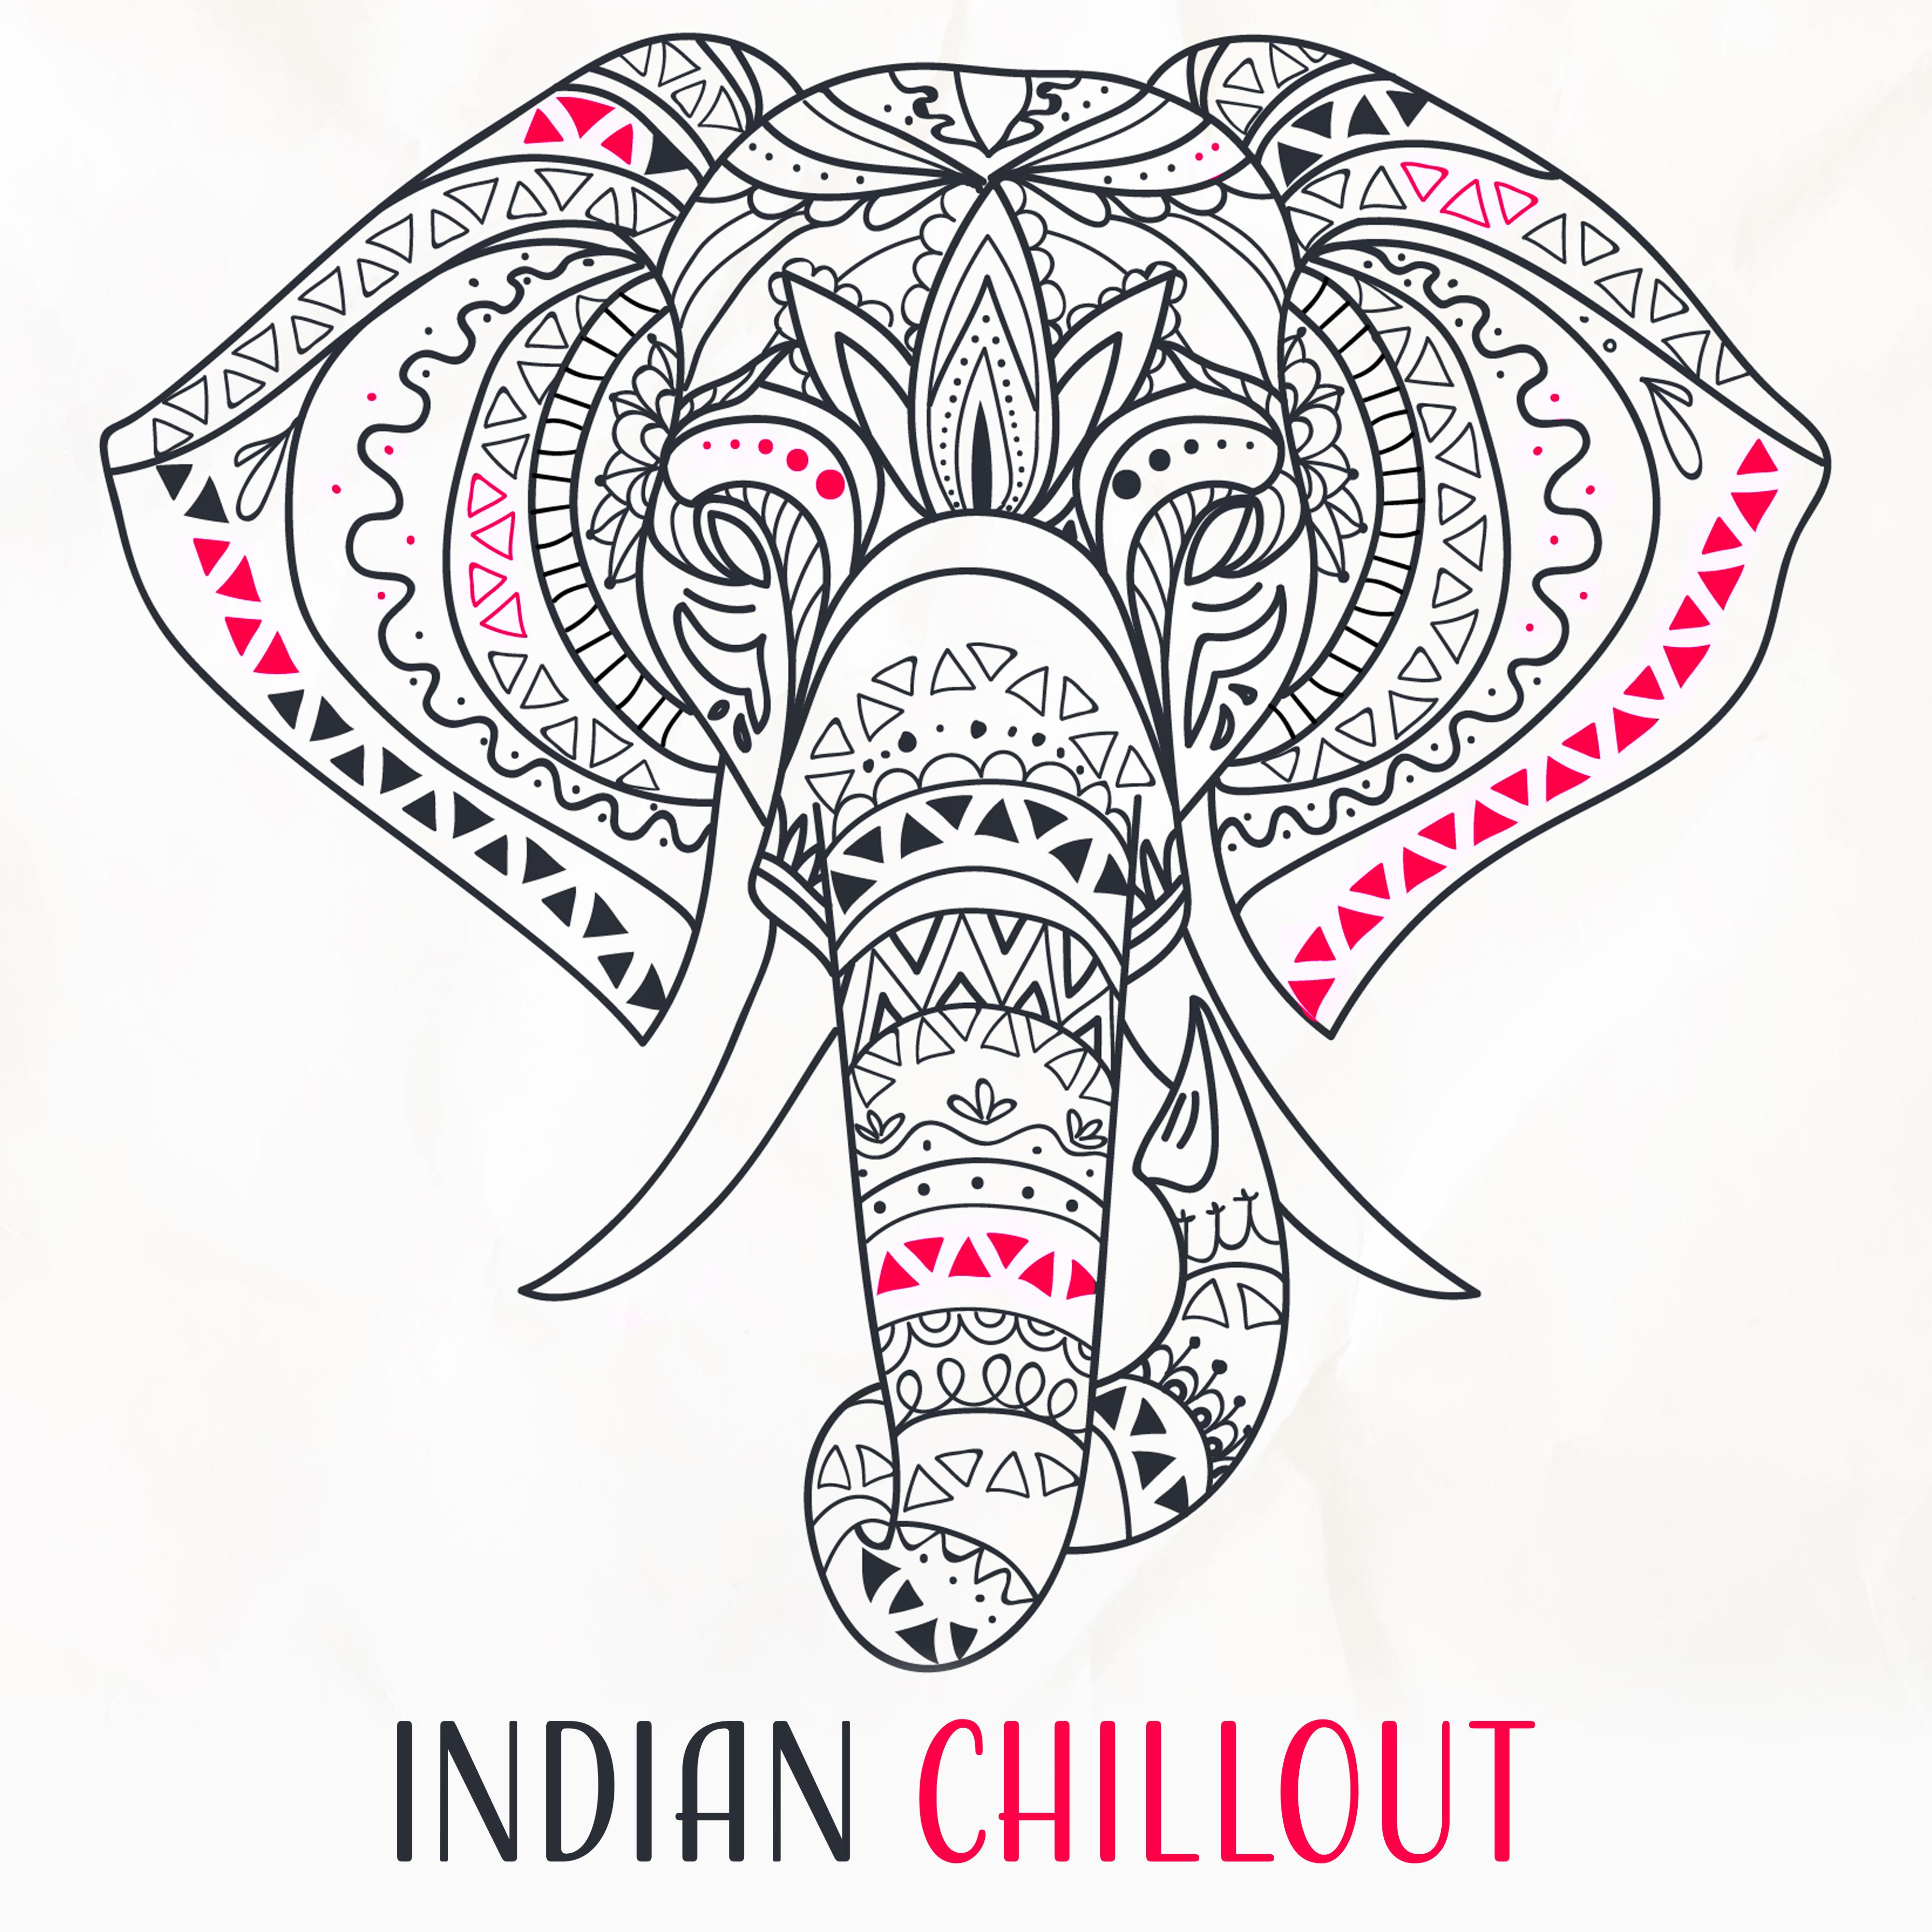 Indian Chillout